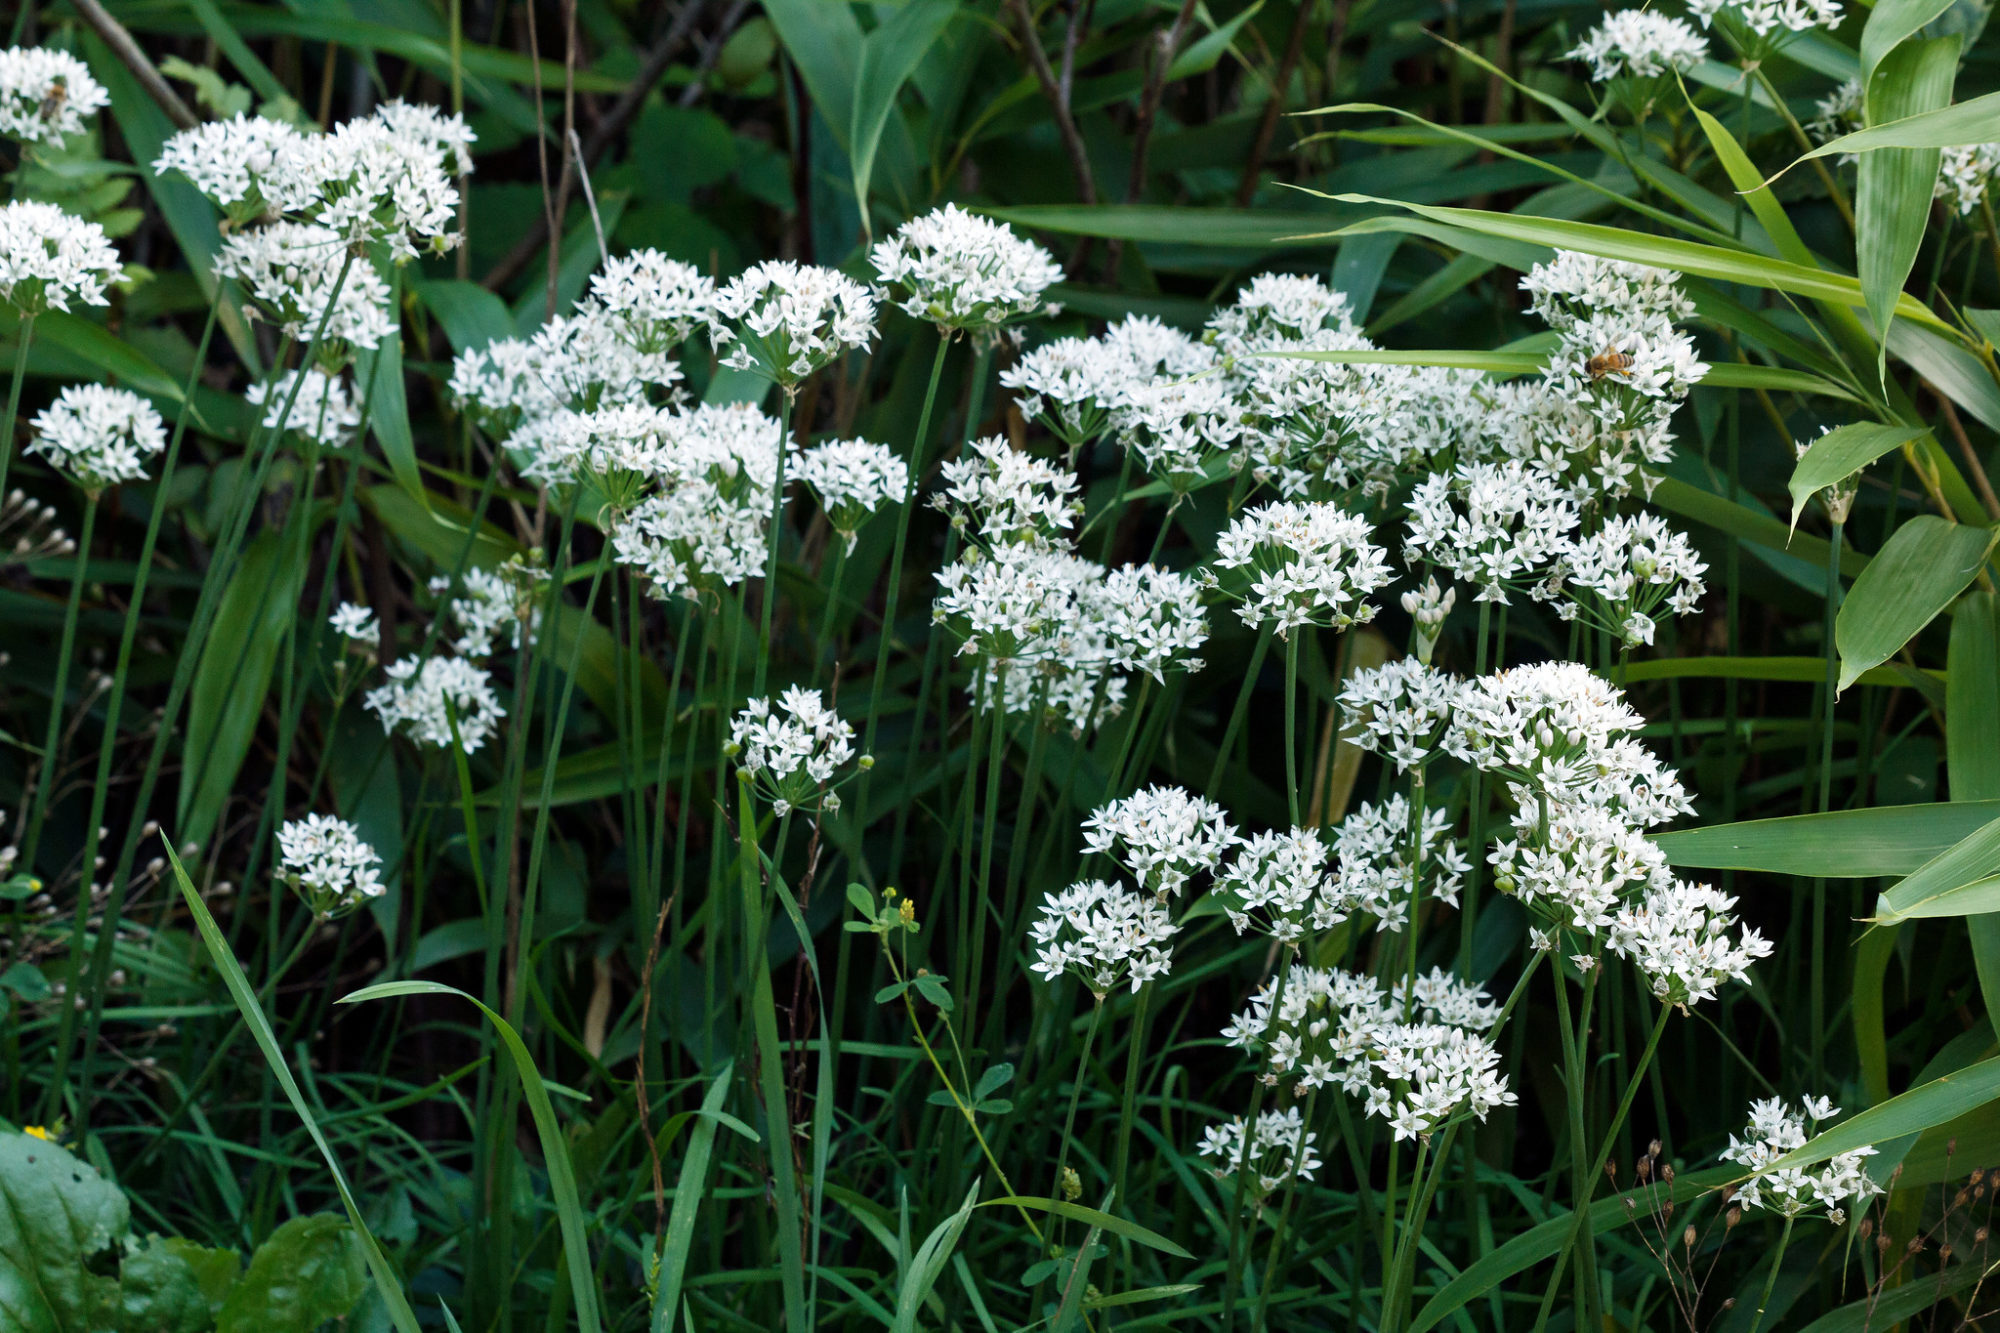 Garlic chives (Allium tuberosum) in flower in late summer/ early fall